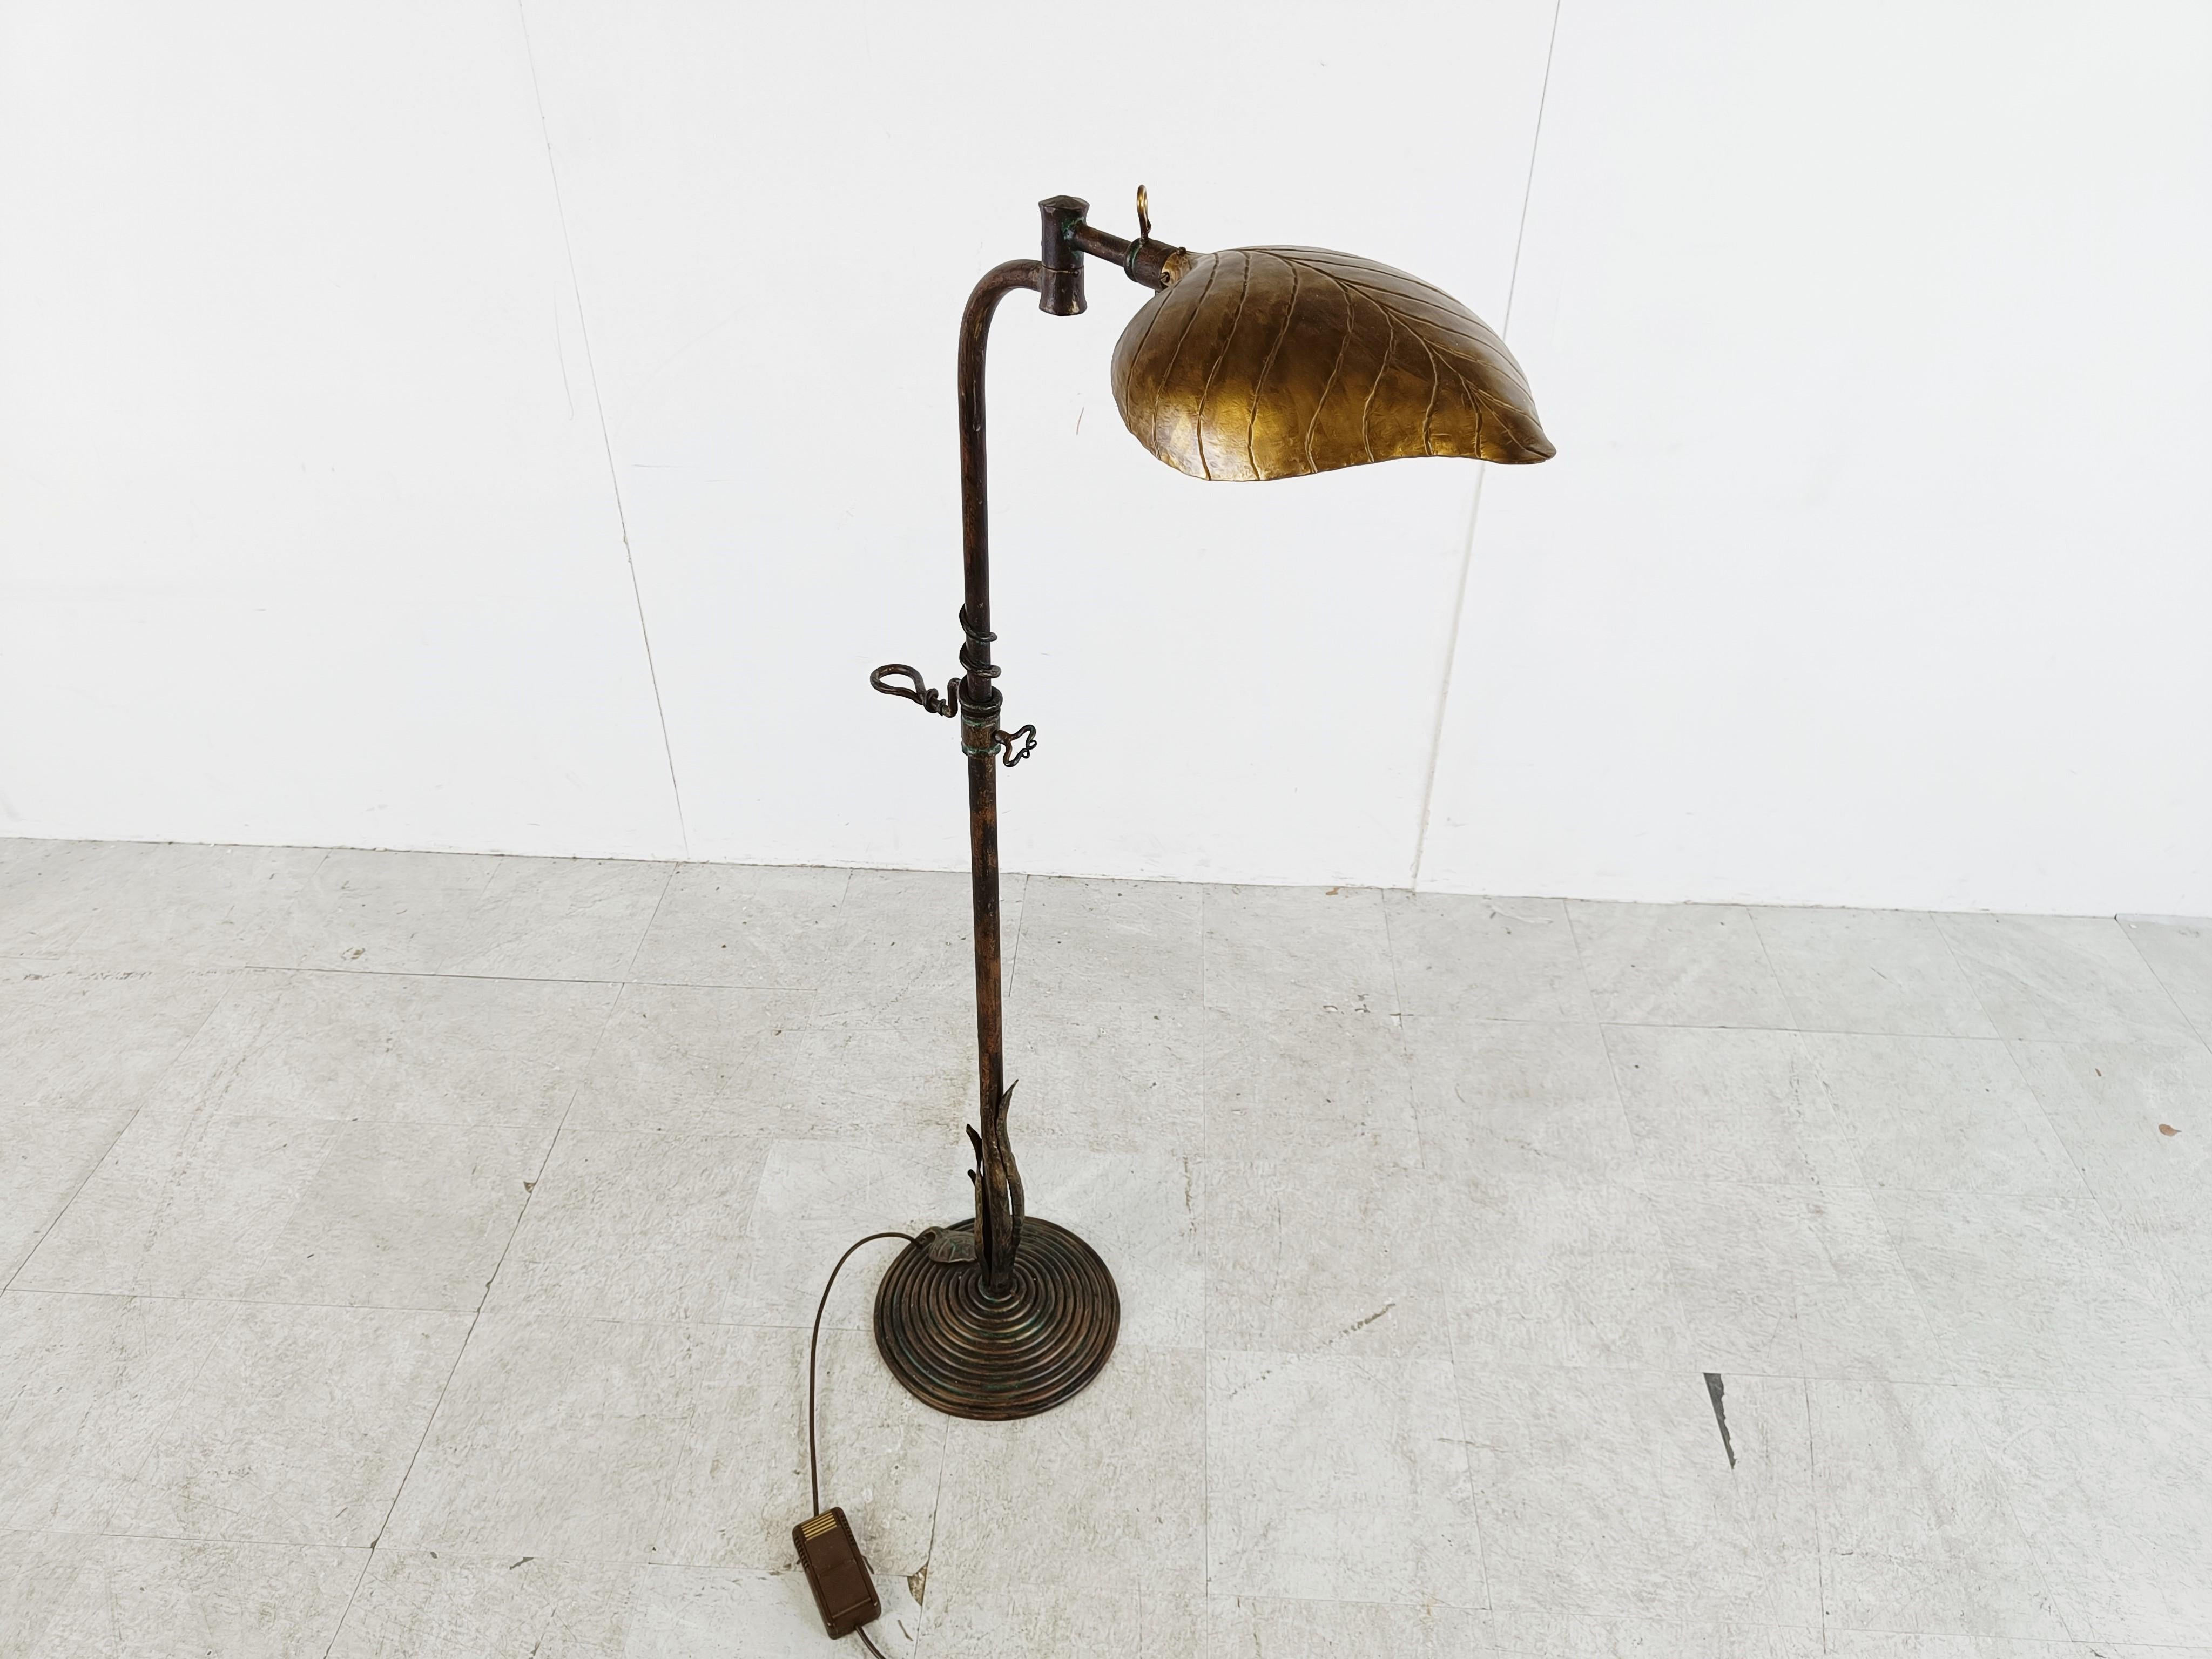 Vintage brass leaf floor lamp with a bronzed metal based.

the lamp shade is adjustable and the length of the lamp is adjustable.

Tested, works with a regular E27 light bulb.

1970s - Germany

Height: 145cm/57.08